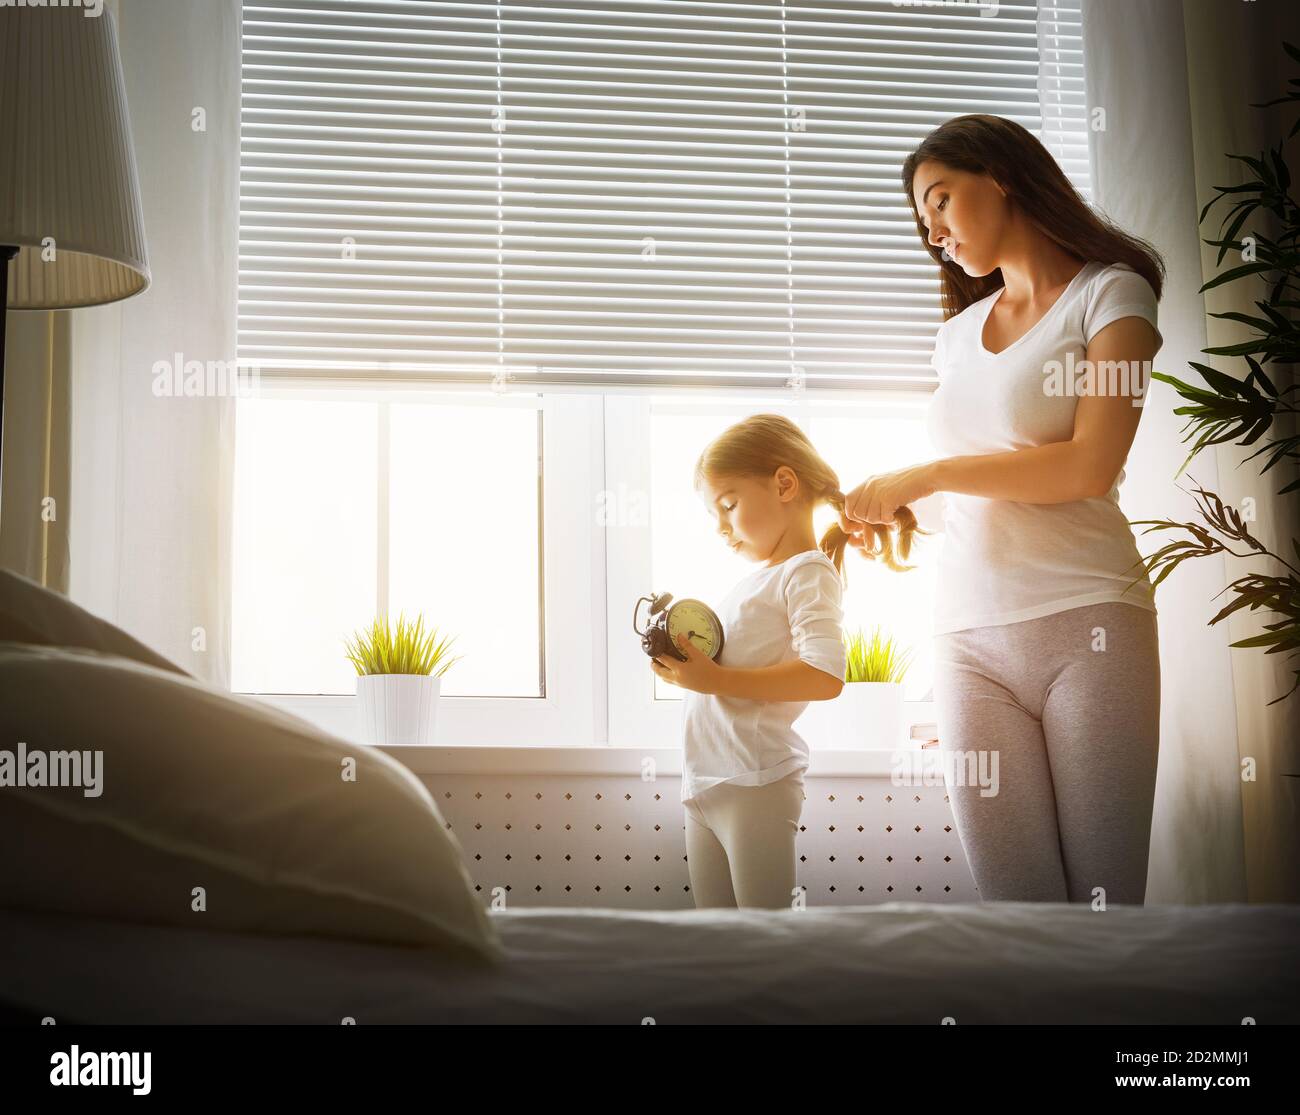 mother combing her daughter's hair Stock Photo